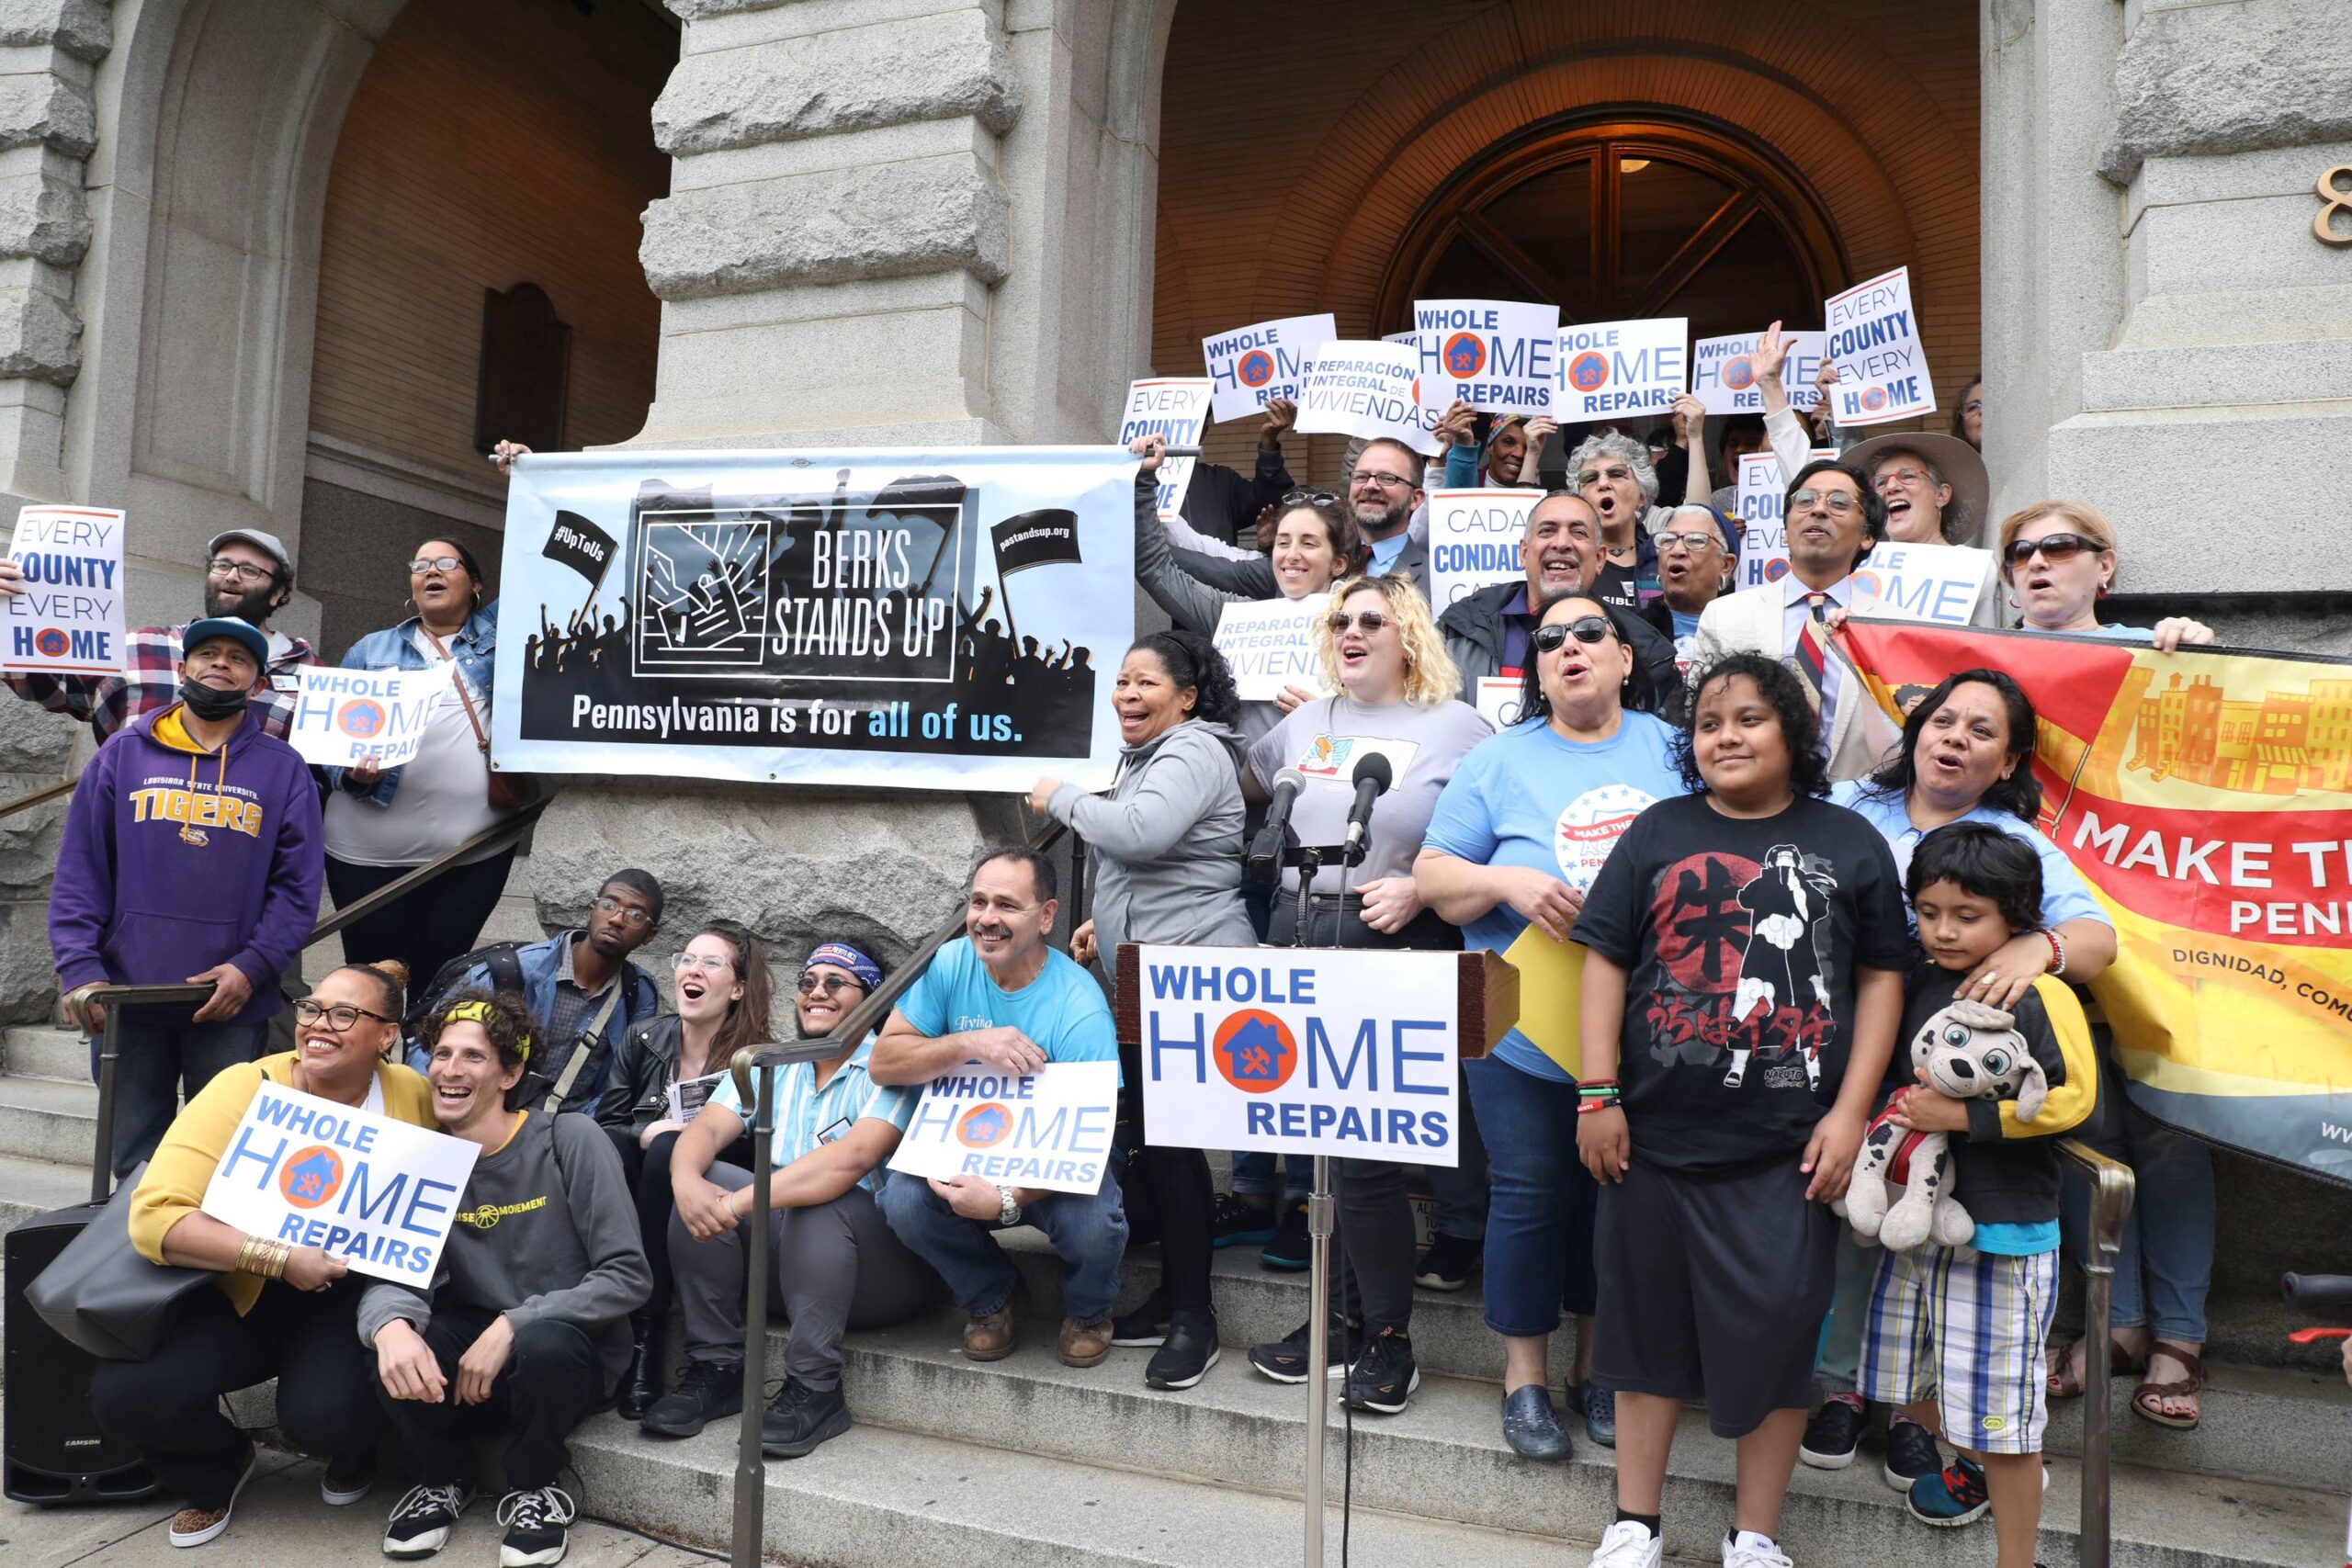 Group of people at the steps of a building smiling and holding signs that read "Whole Home Repairs".